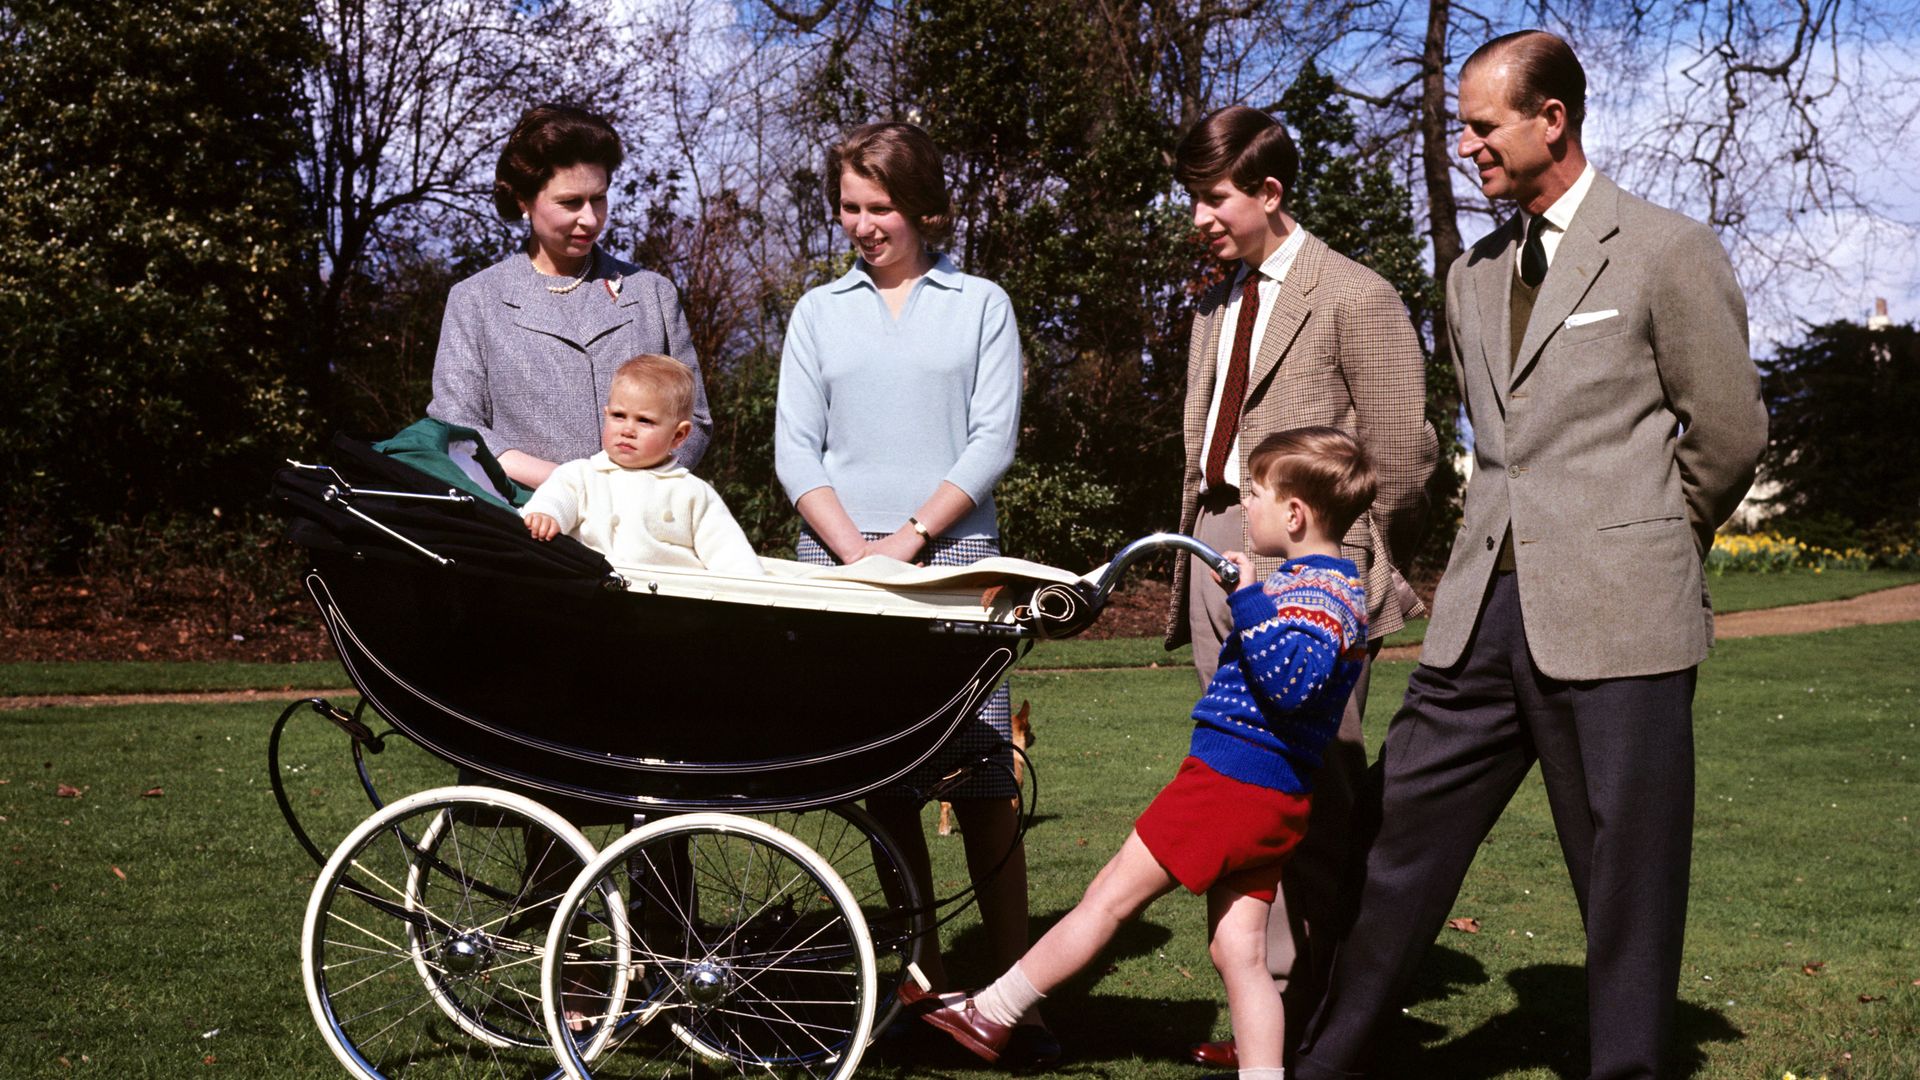 Royal family celebrating Queen Elizabeth II' s39th birthday at Frogmore, 1965